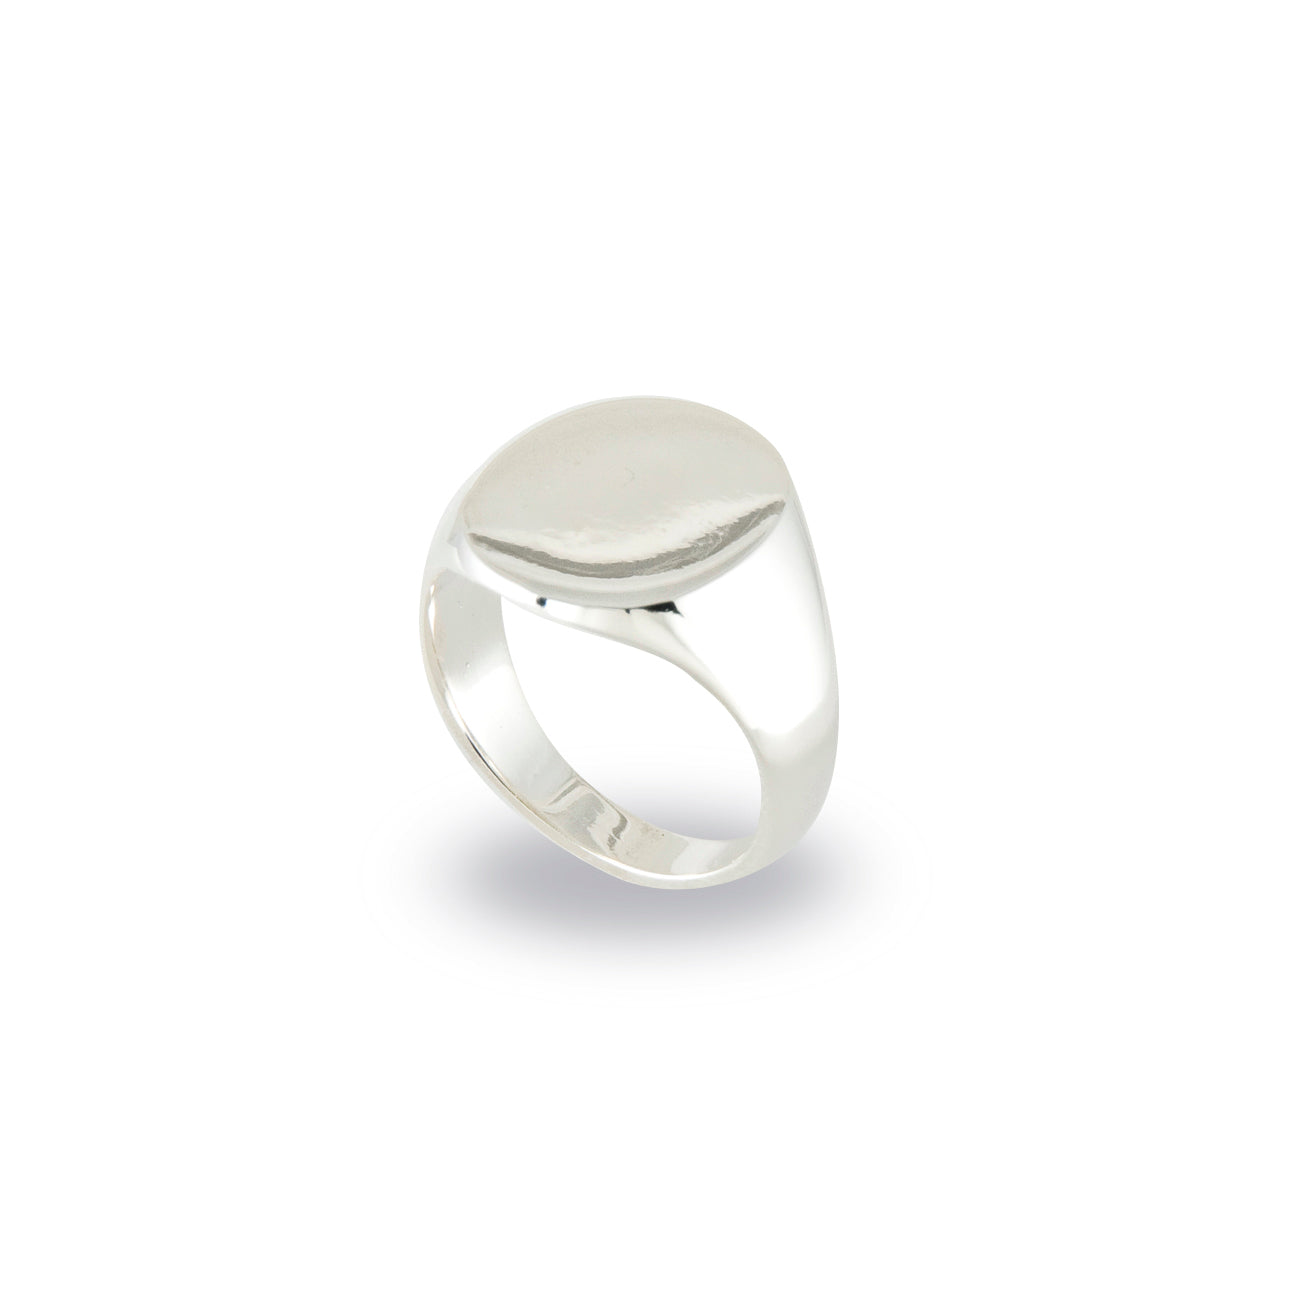 Oval Signet Ring, Sterling Silver | Silver Jewelry Stores Long